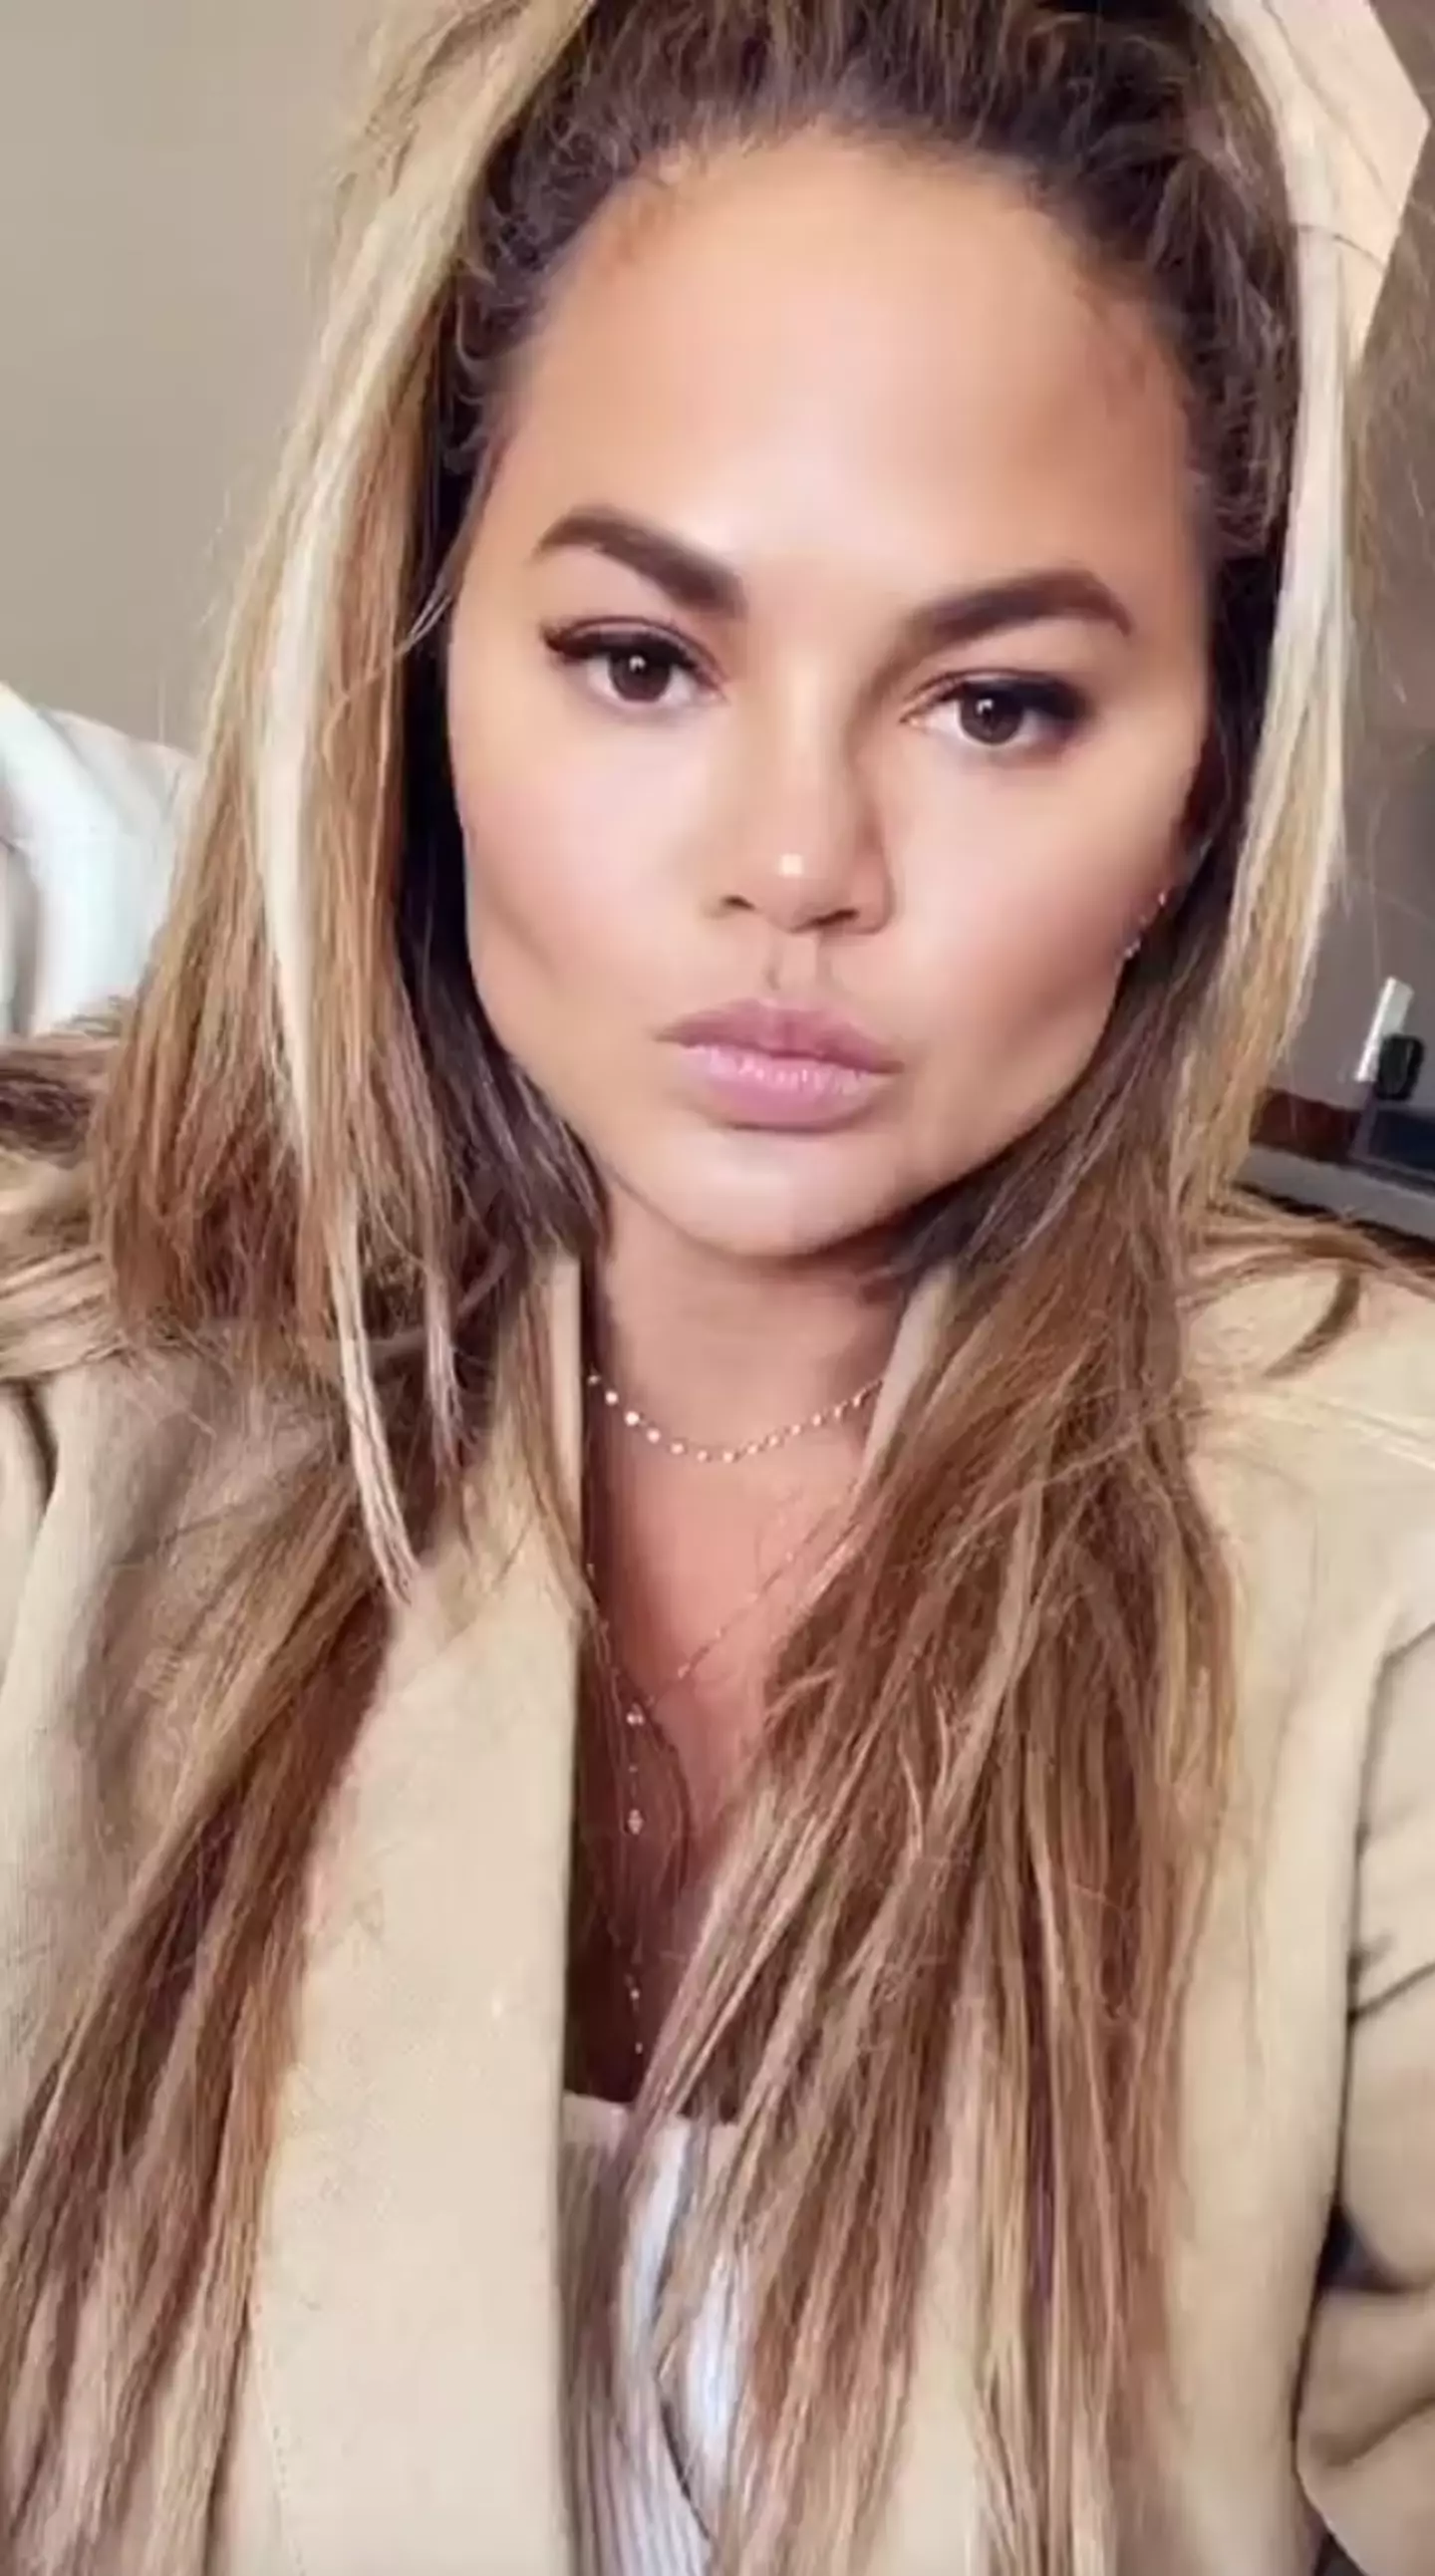 Chrissy Teigen revealed the results of her cheek surgery on Instagram (